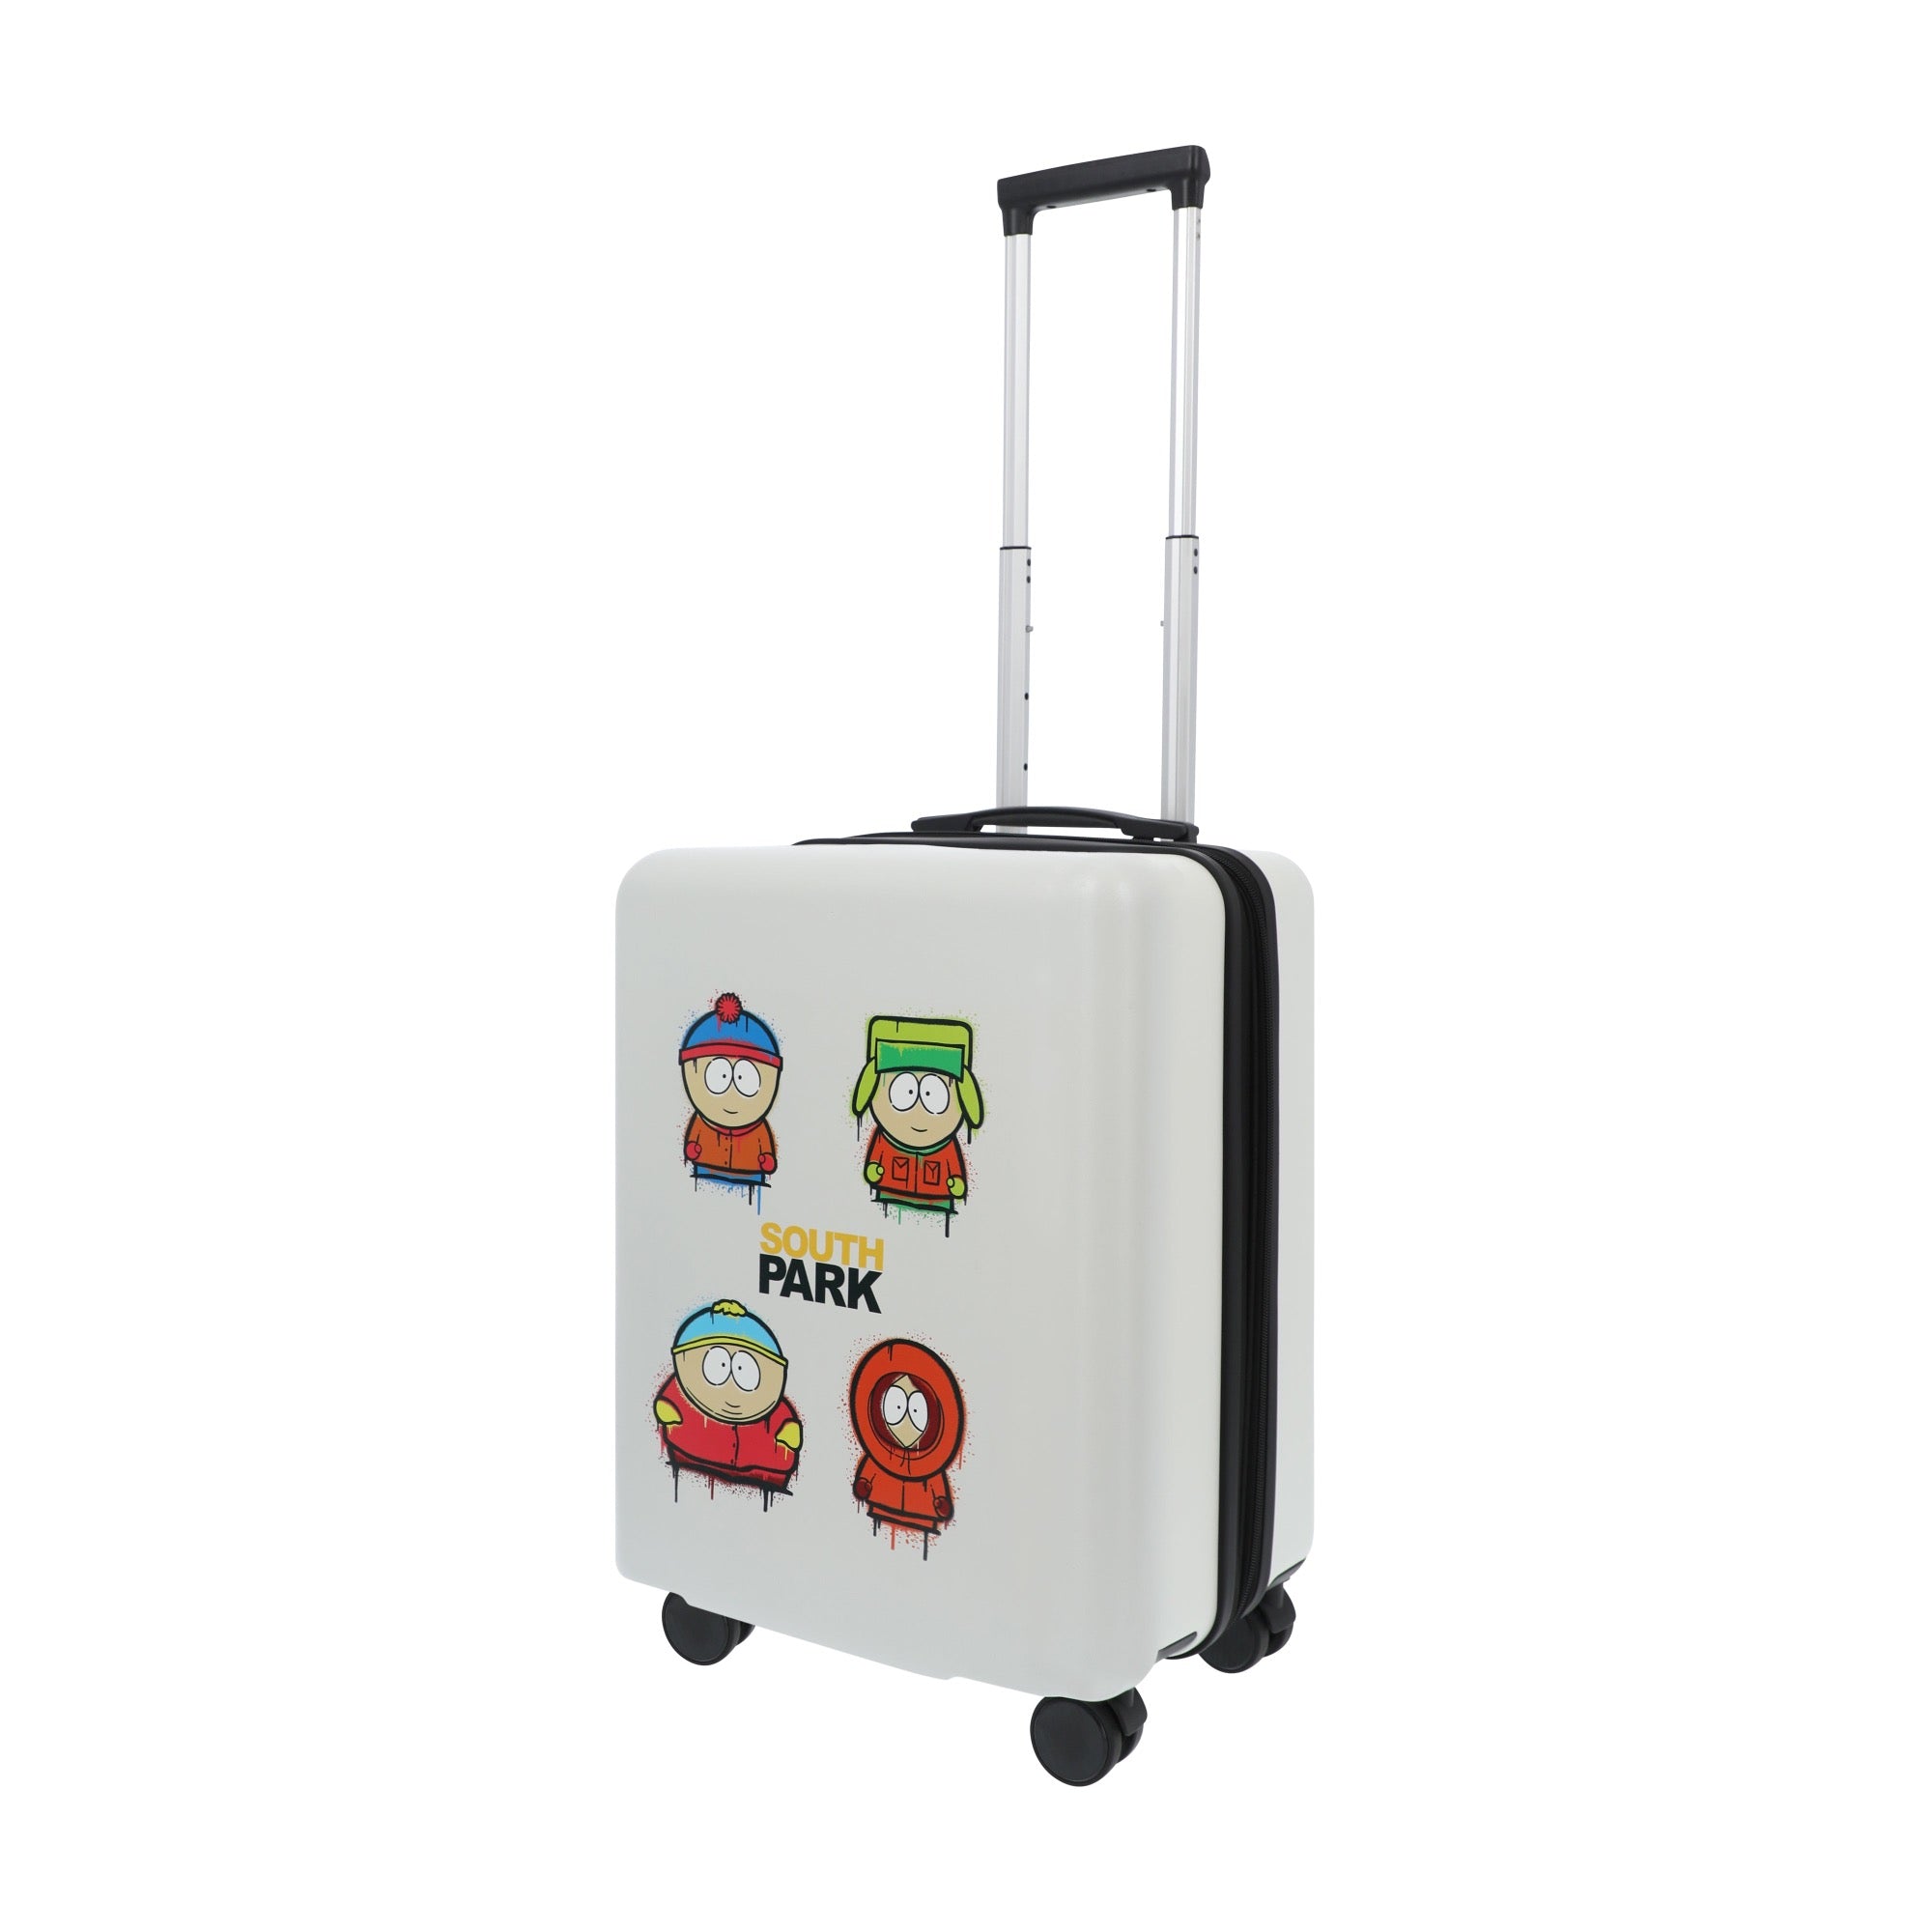 White paramount south park 22.5" carry-on spinner suitcase luggage by Ful